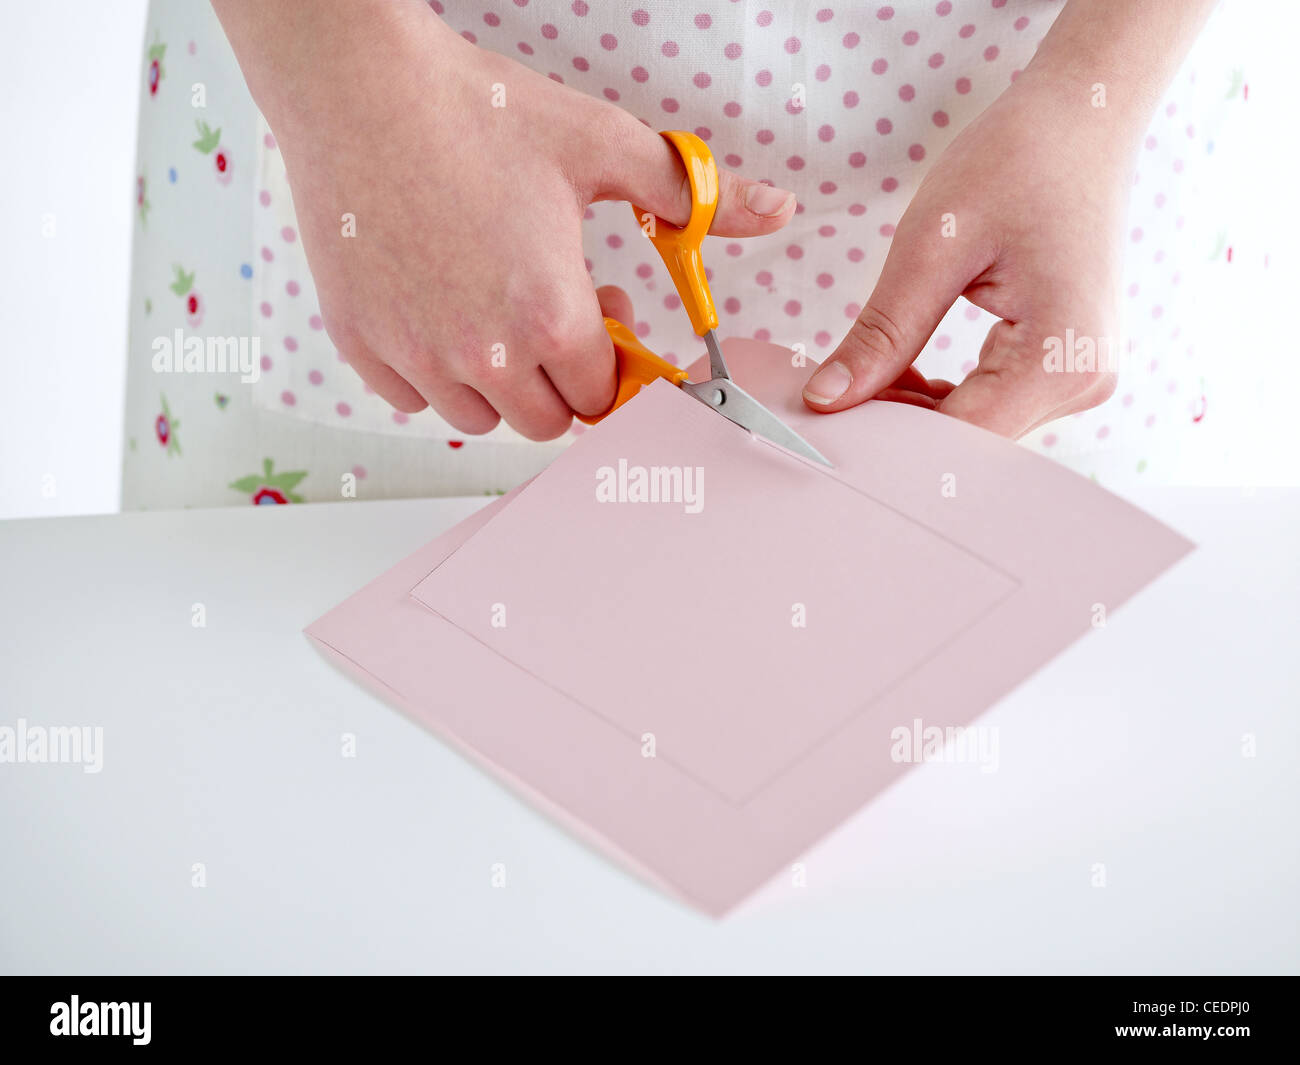 Girl using scissors and cutting a square on pink paper Stock Photo